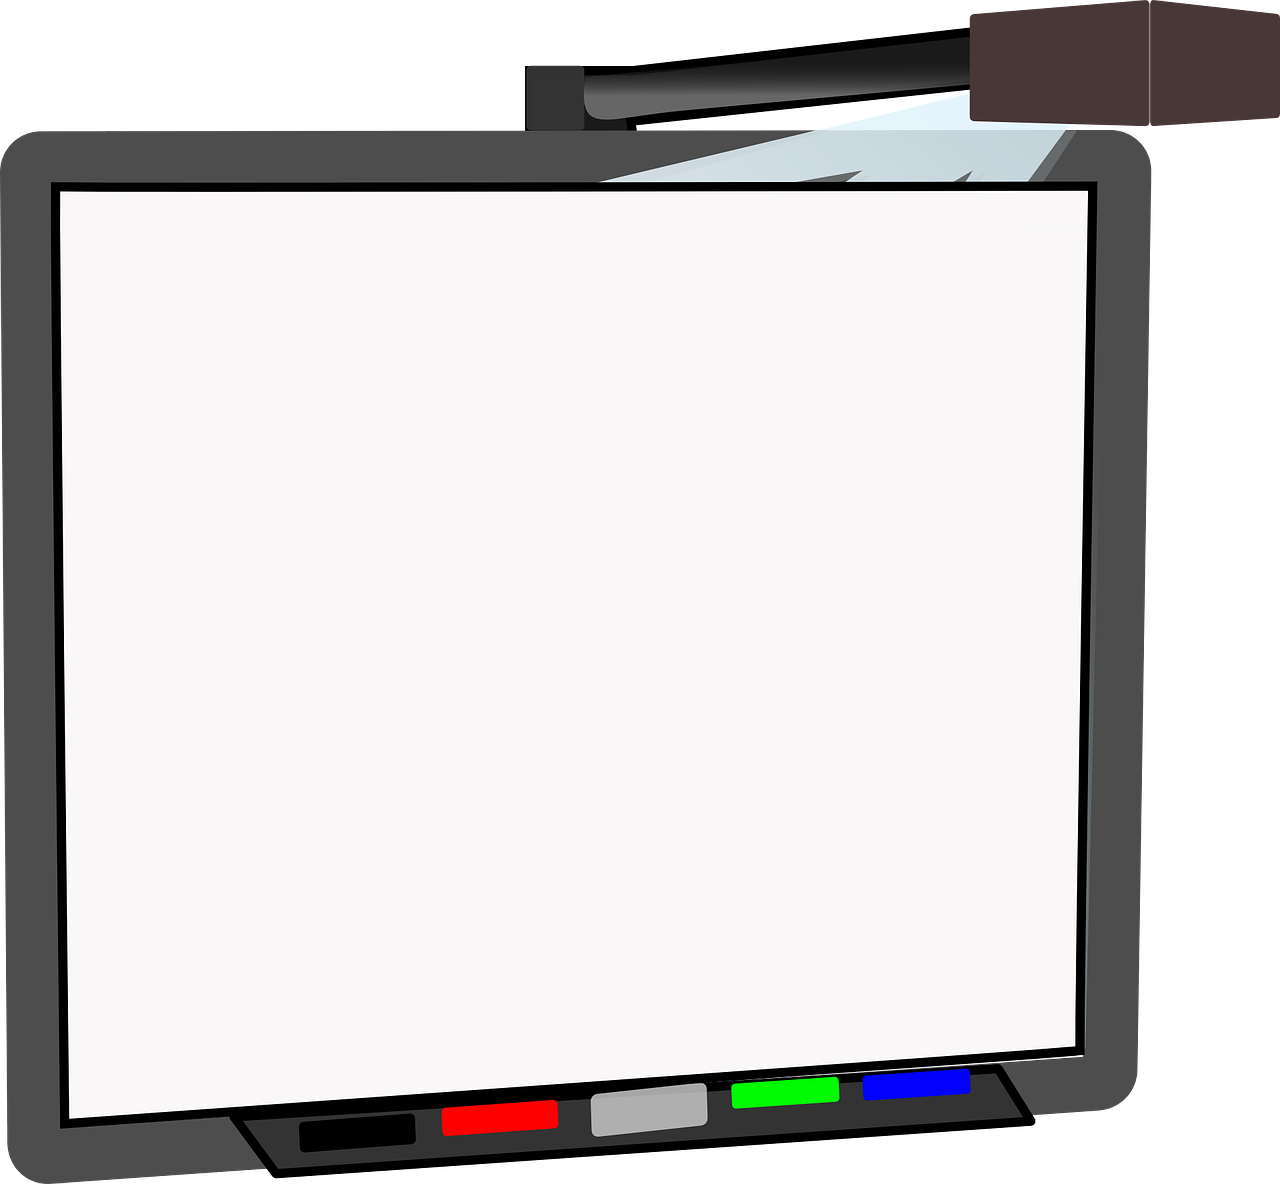 How to Choose the Best Online Whiteboard for Your Team